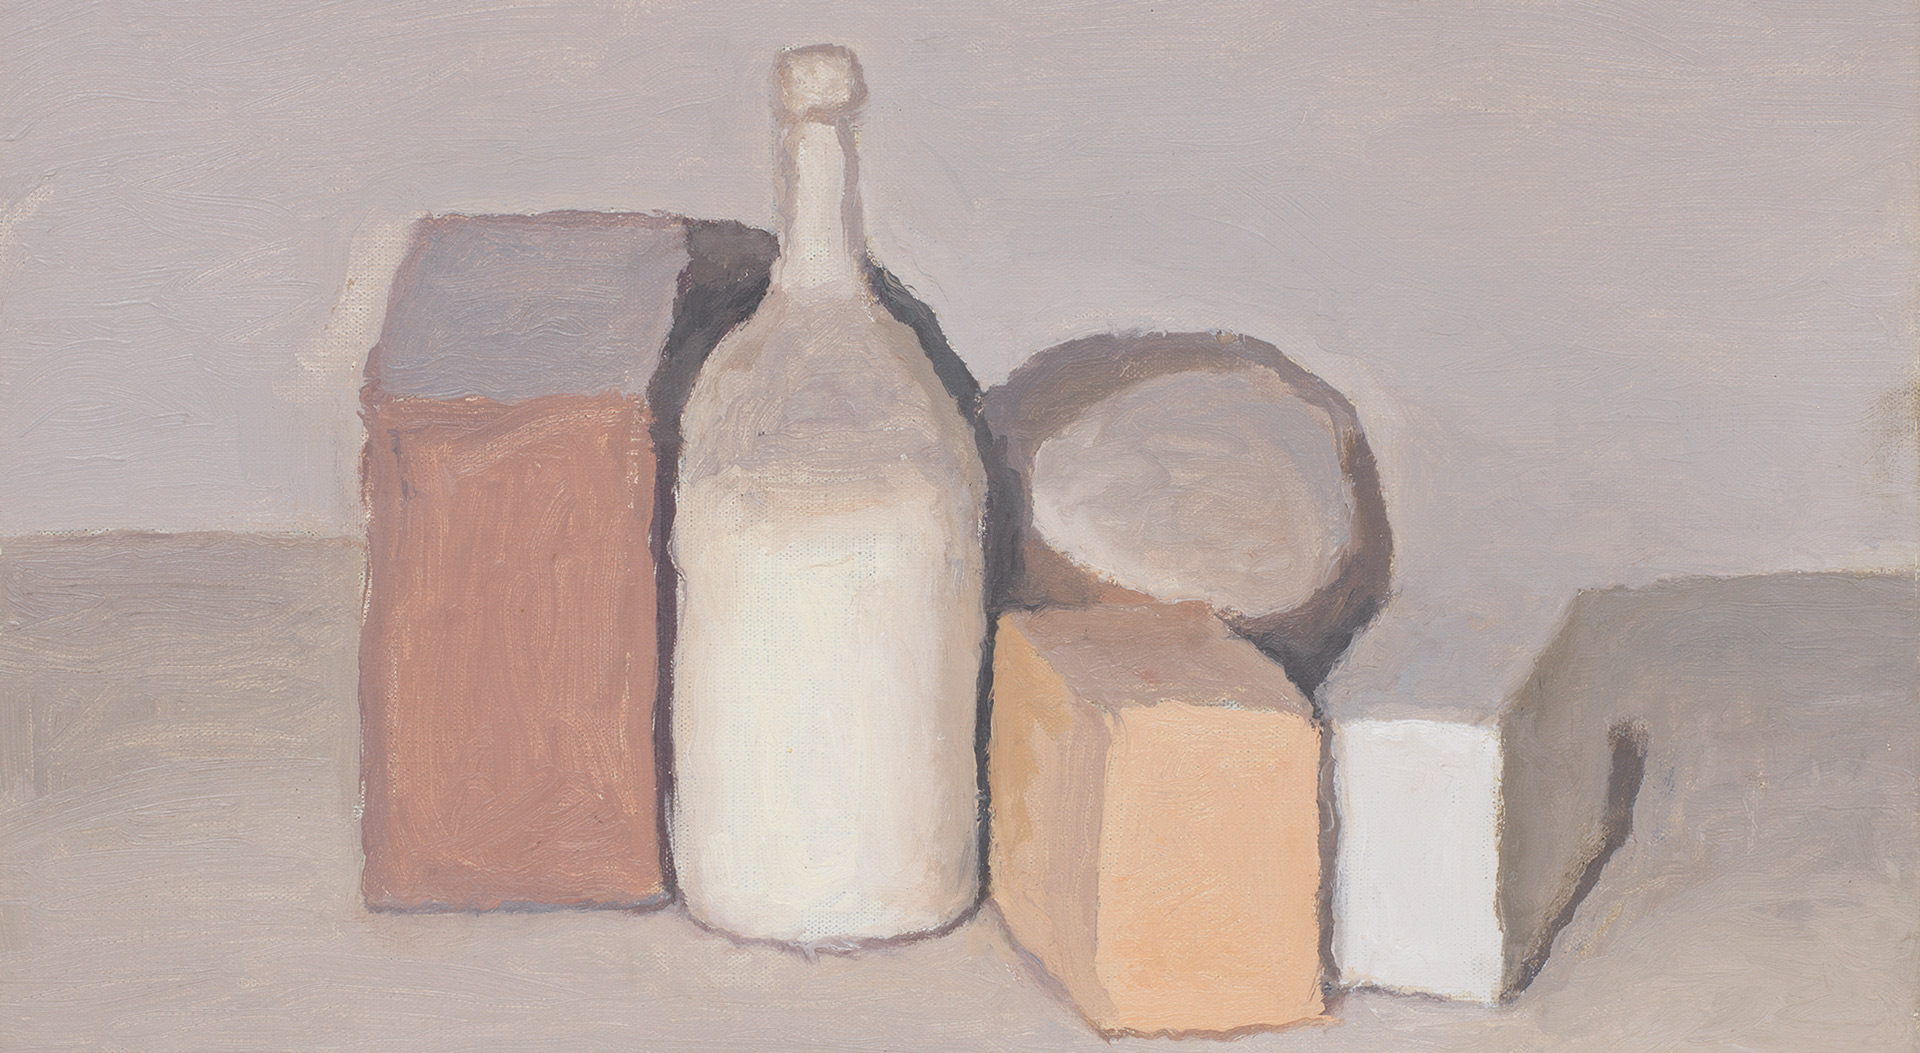 A detail from a painting by Giorgio Morandi, titled Natura morta (Still Life), dated 1955.